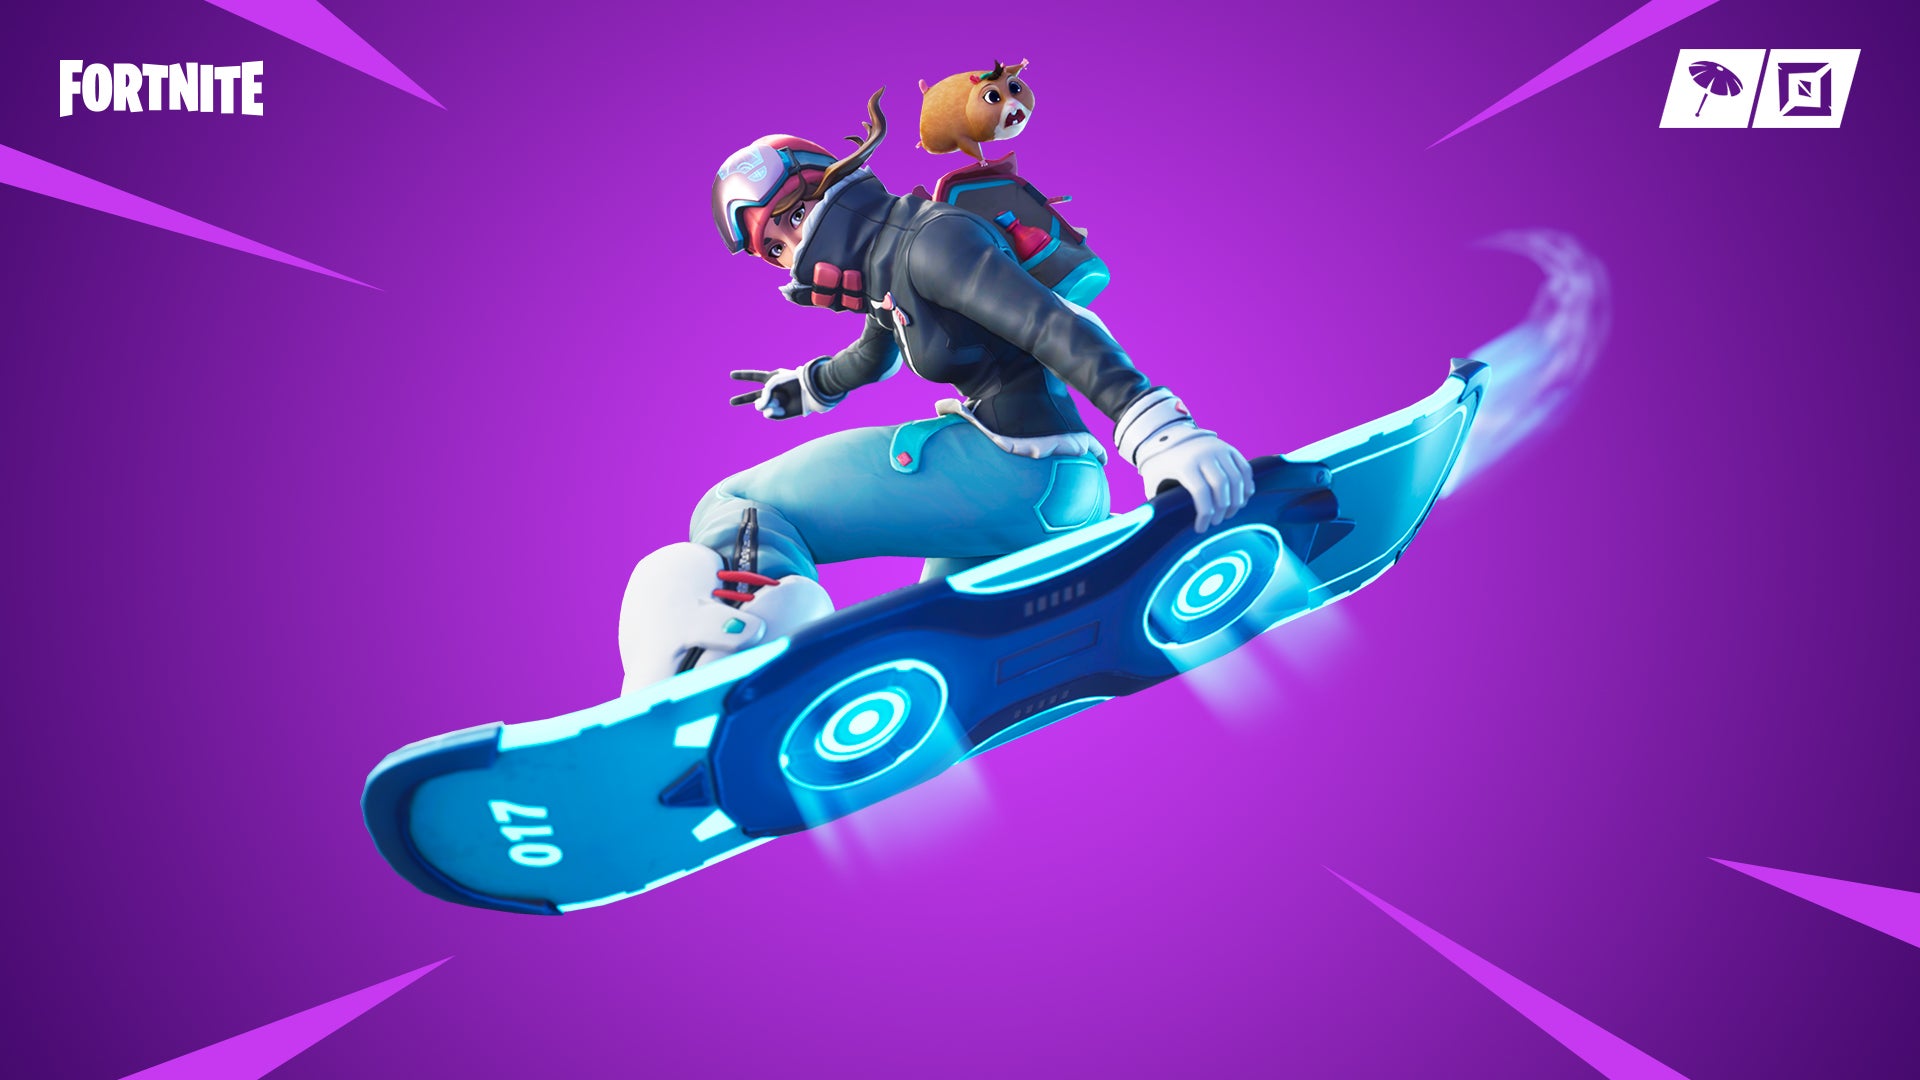 Image for Fortnite v7.40 content update adds Driftboards, Driftin' LTM and Catch LTM.